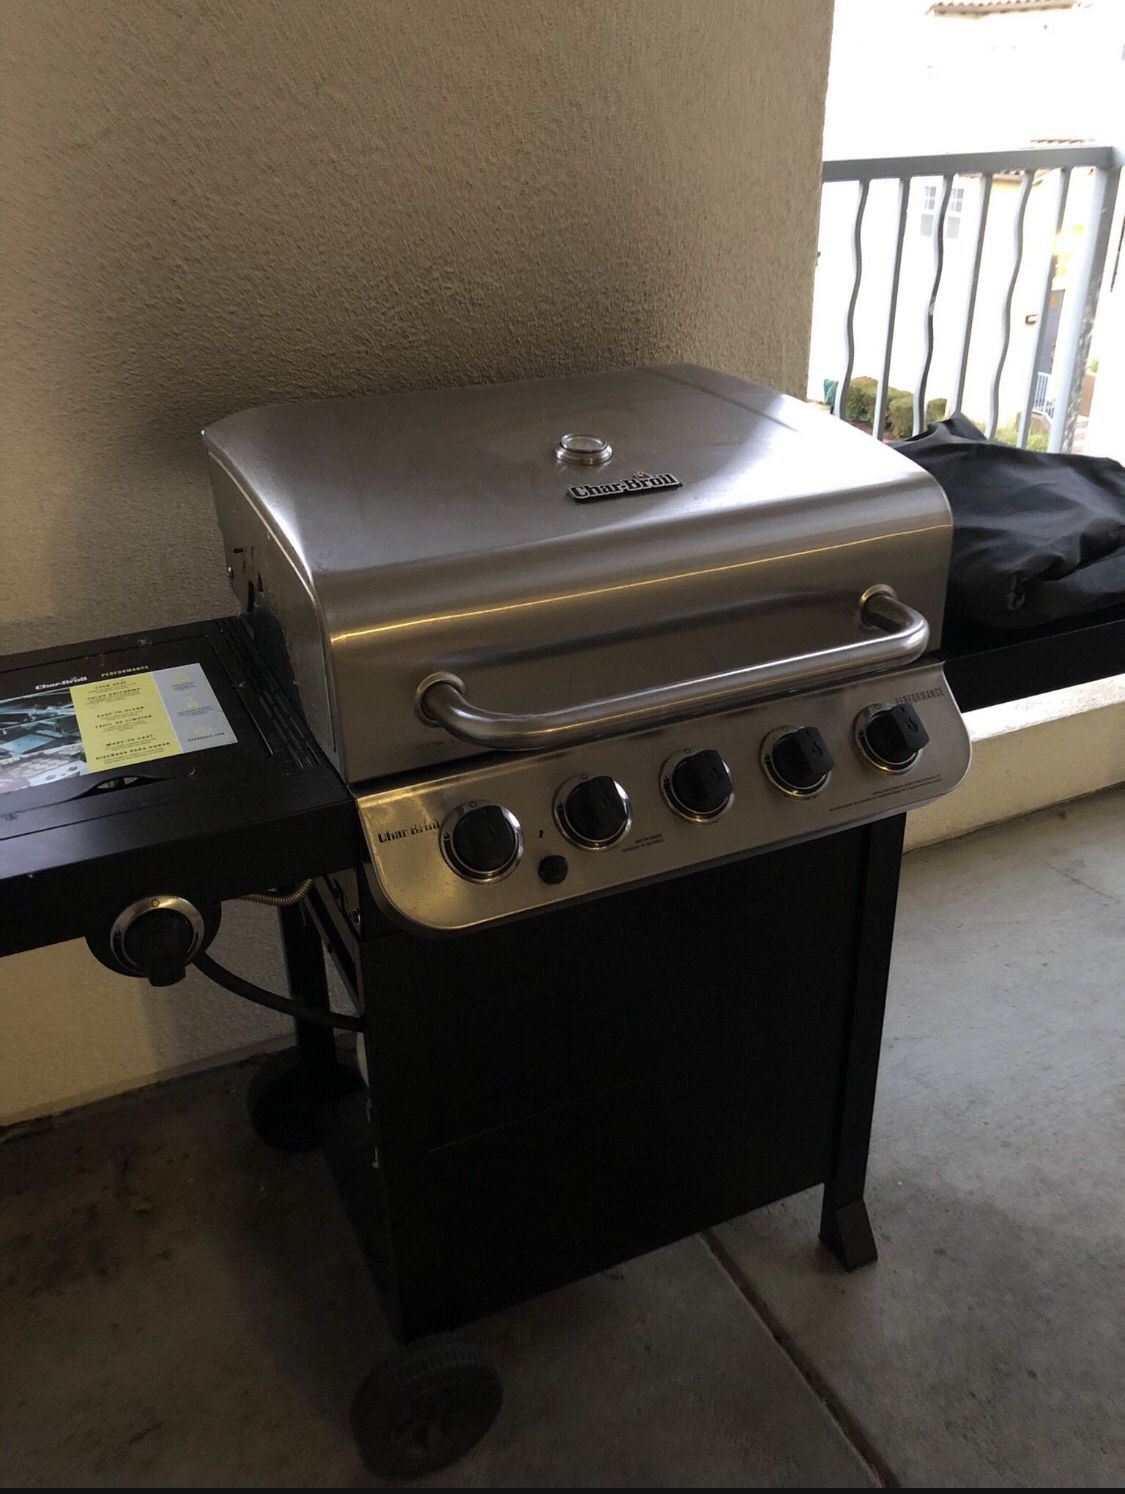 BBQ Grill With Attached Stove